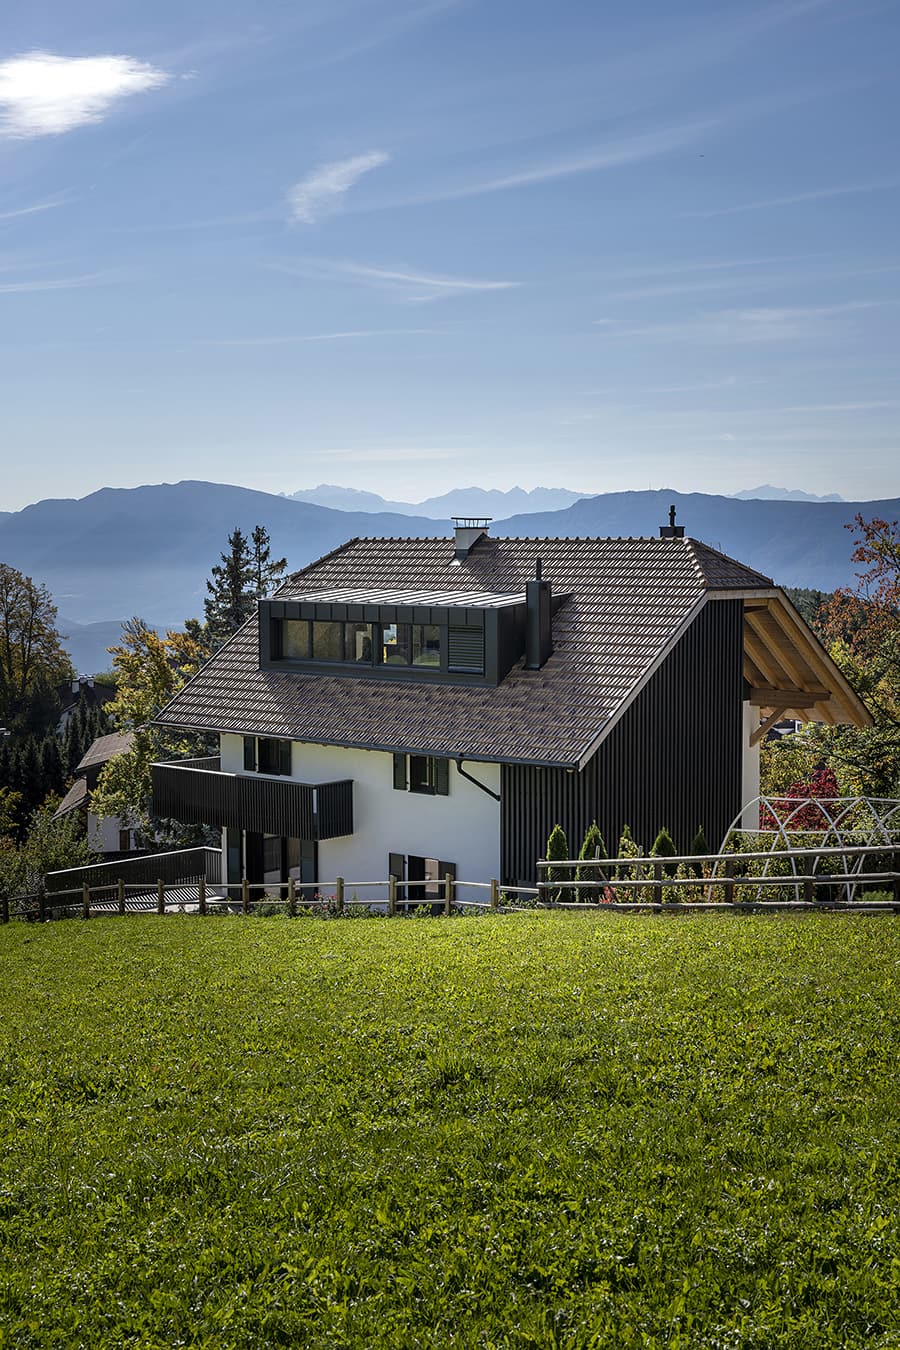 Villa Renovation: Inside and Beyond the South Tyrolean Traditions